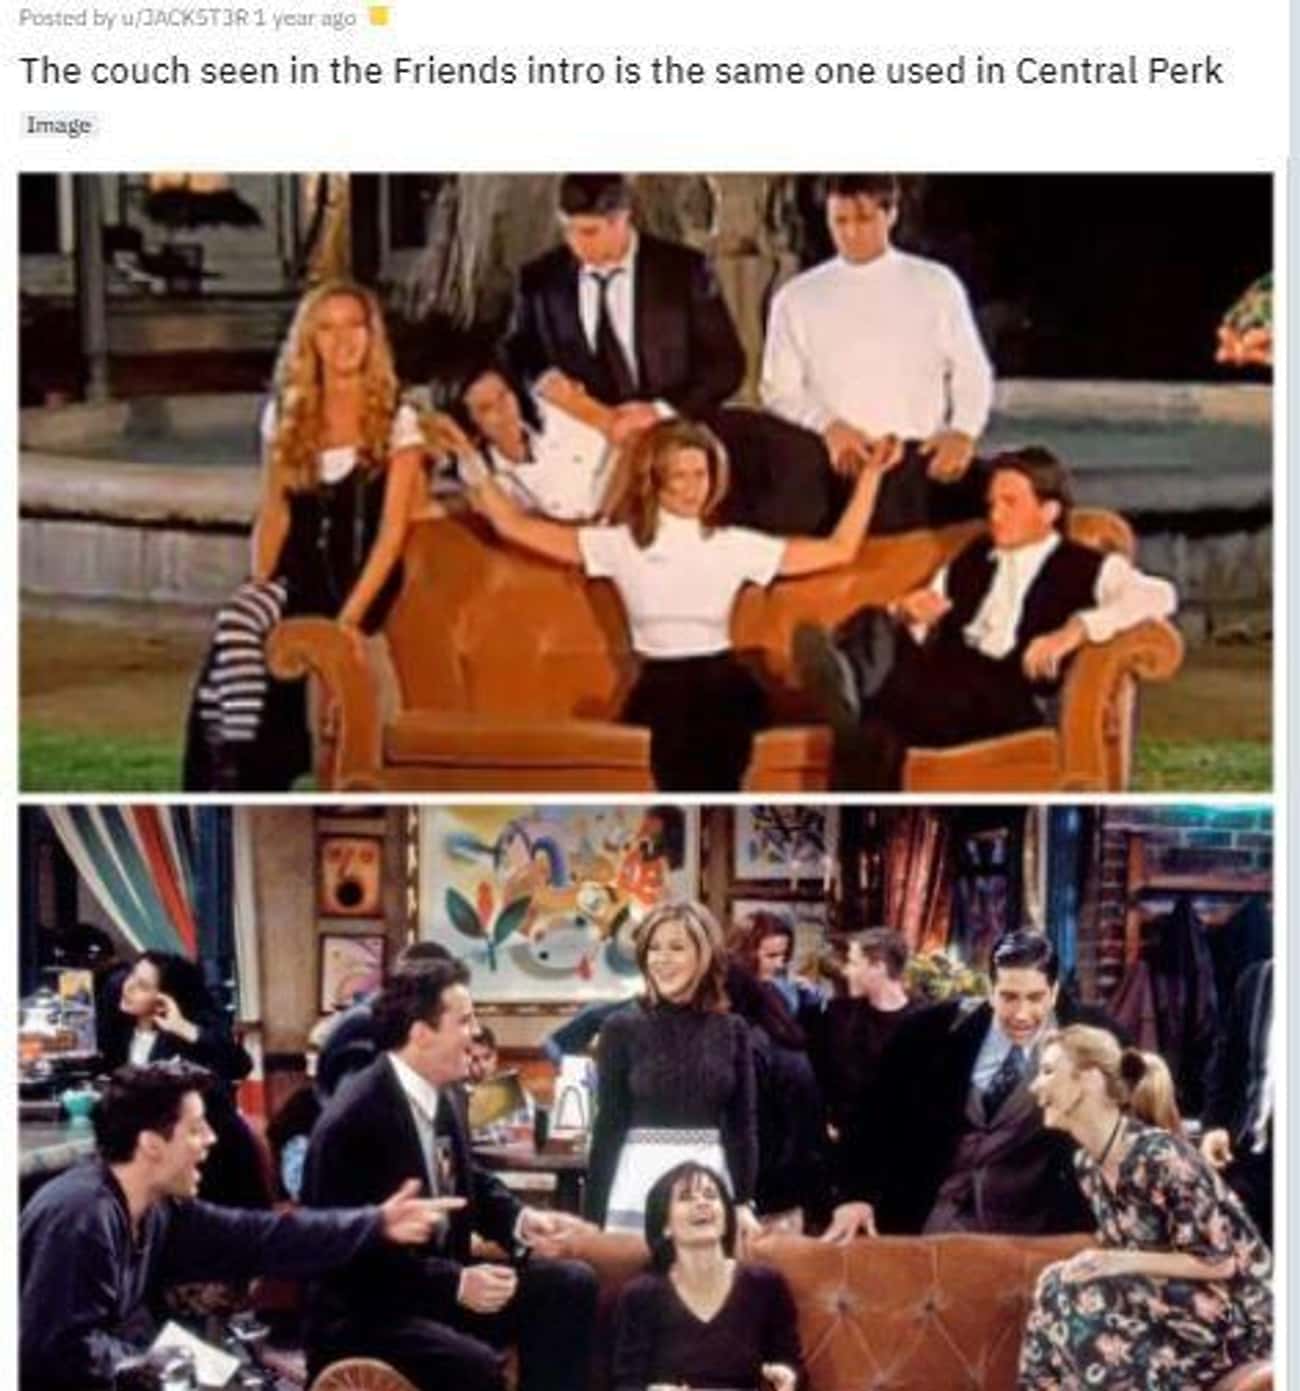 The Gang Took The Central Perk Couch To The Fountain